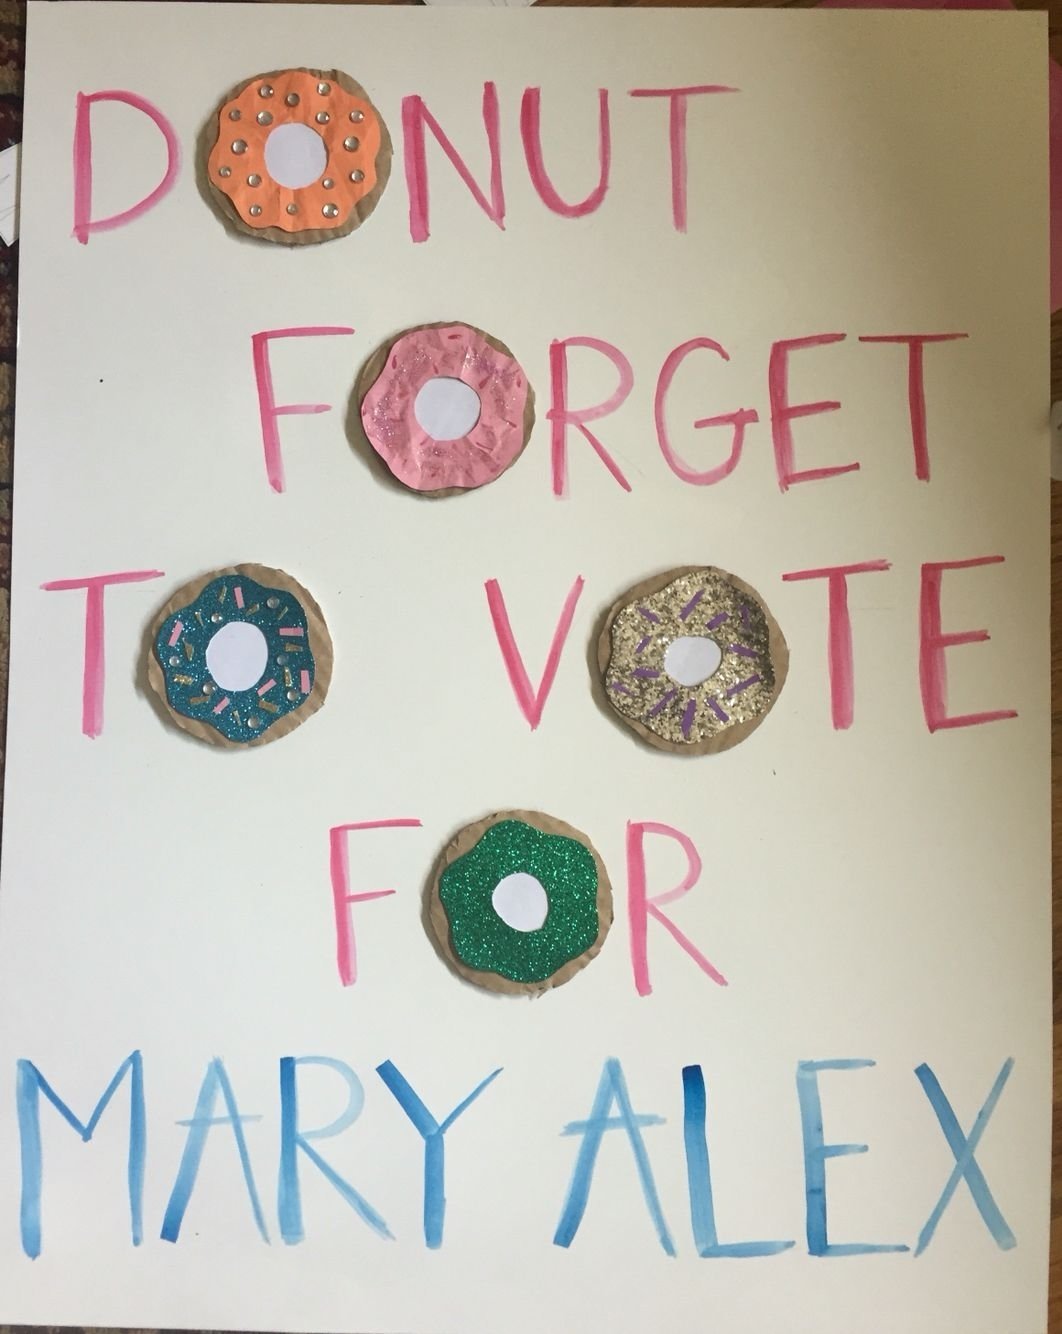 10 Spectacular Campaign Poster Ideas For Kids cute sga campaign poster donut forget to vote yes pinterest 2022